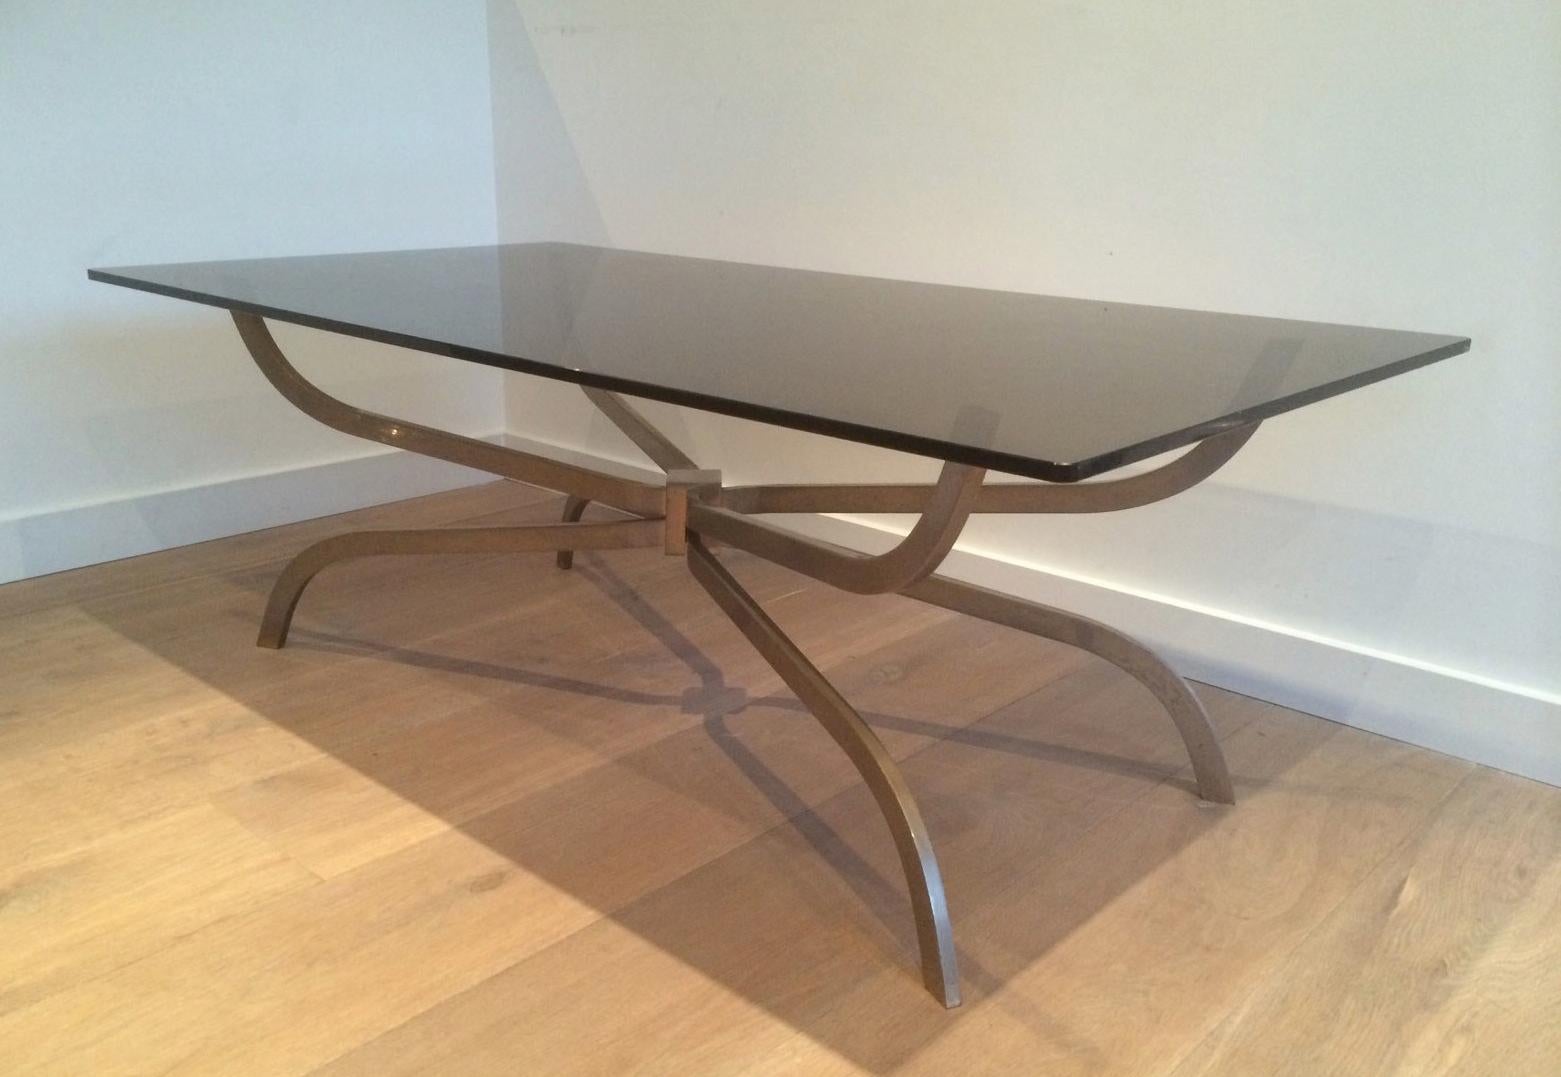 This interesting coffee table is made of brushed steel with a smoked glass top. This is a model by famous French designer Maison Charles. The quality is very good, circa 1960.